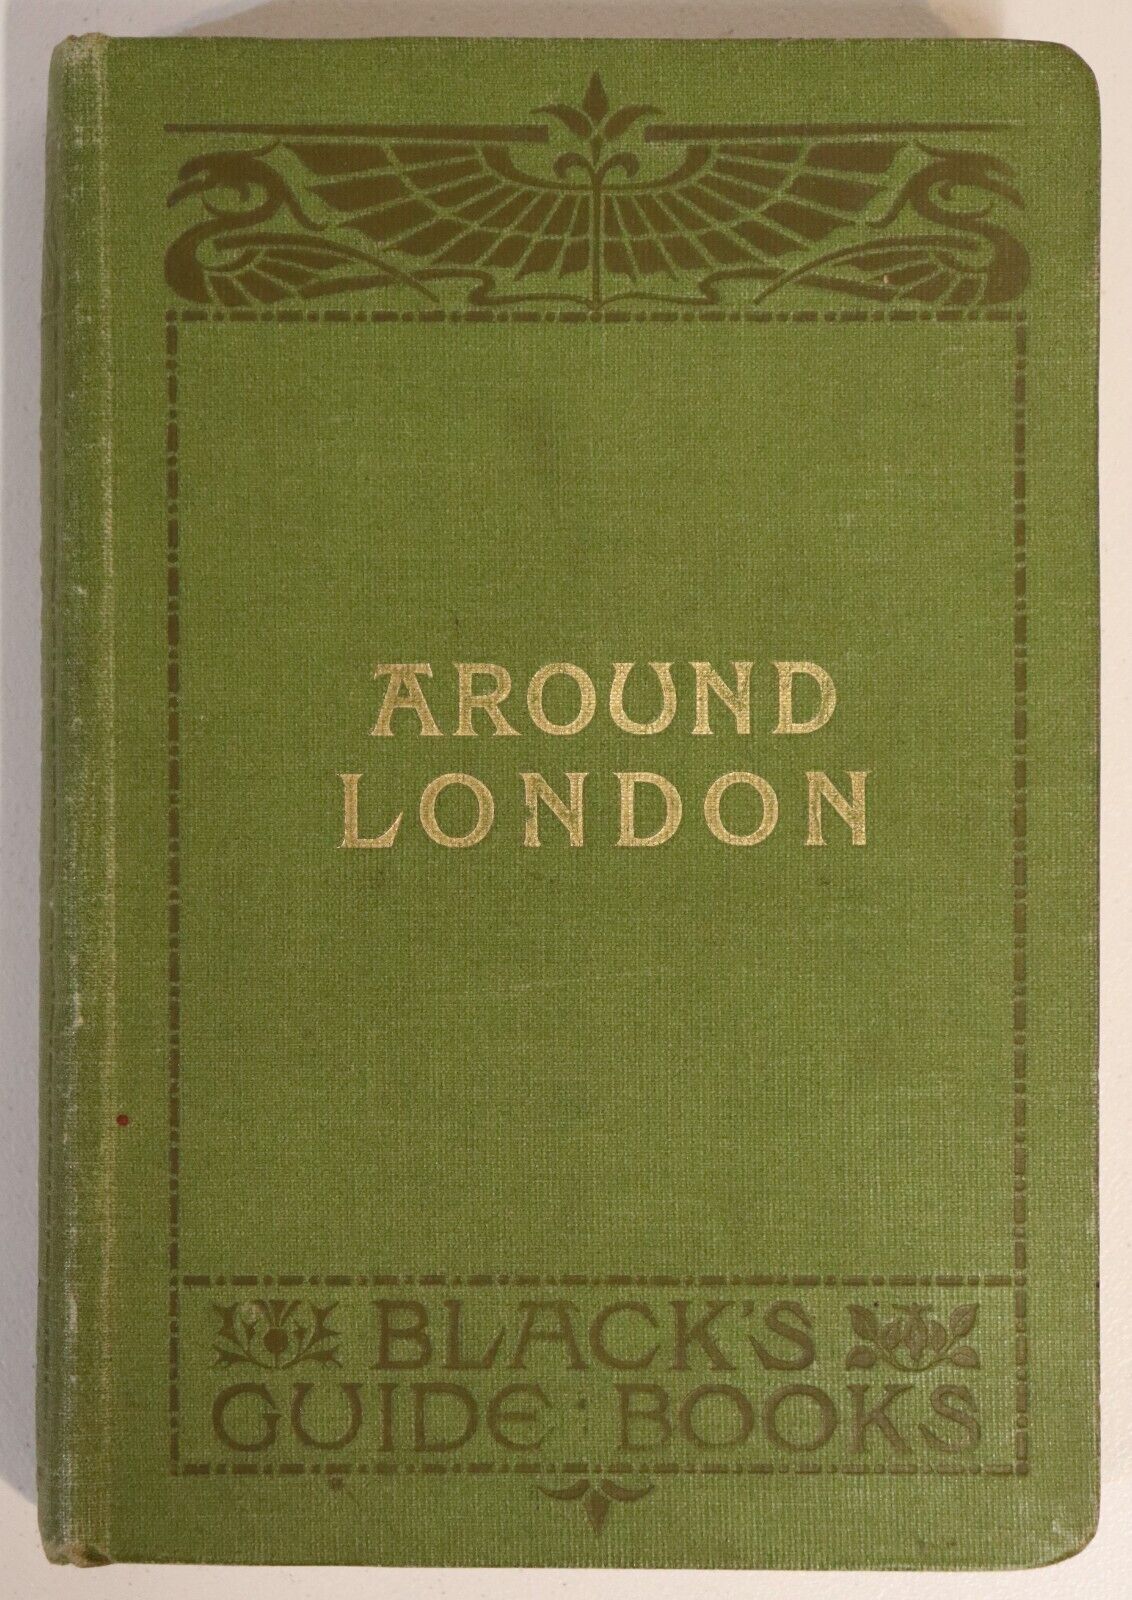 Around London by AR Hope Moncrieff - 1903 - Antique British Travel Guide w/Maps